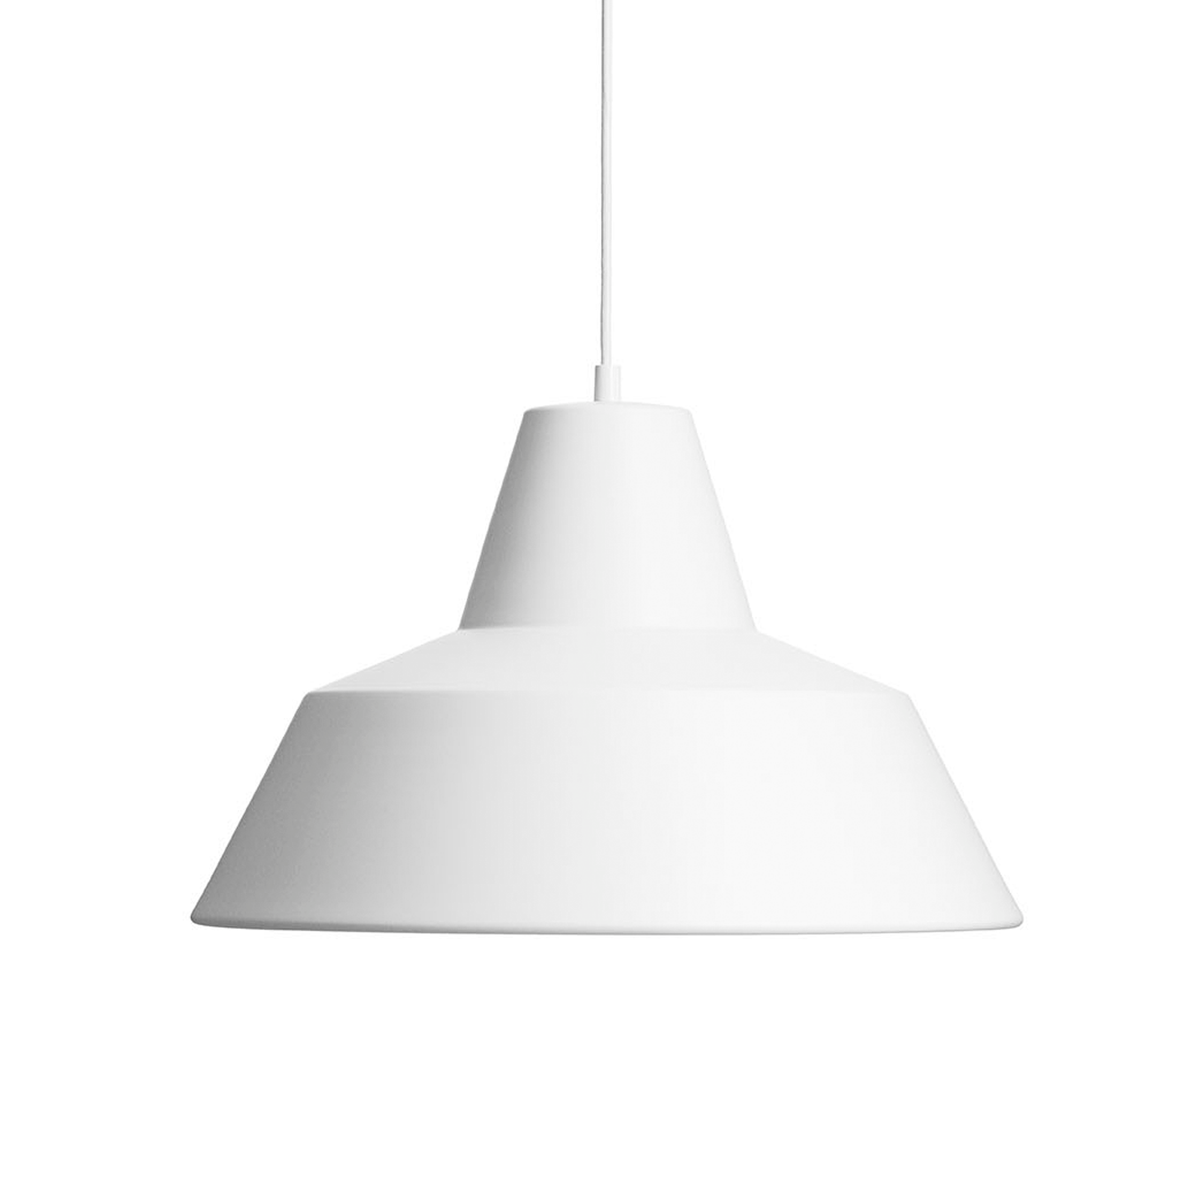 Made by Hand, Workshop Pendant Lamp W4, Matte White, Pendant,